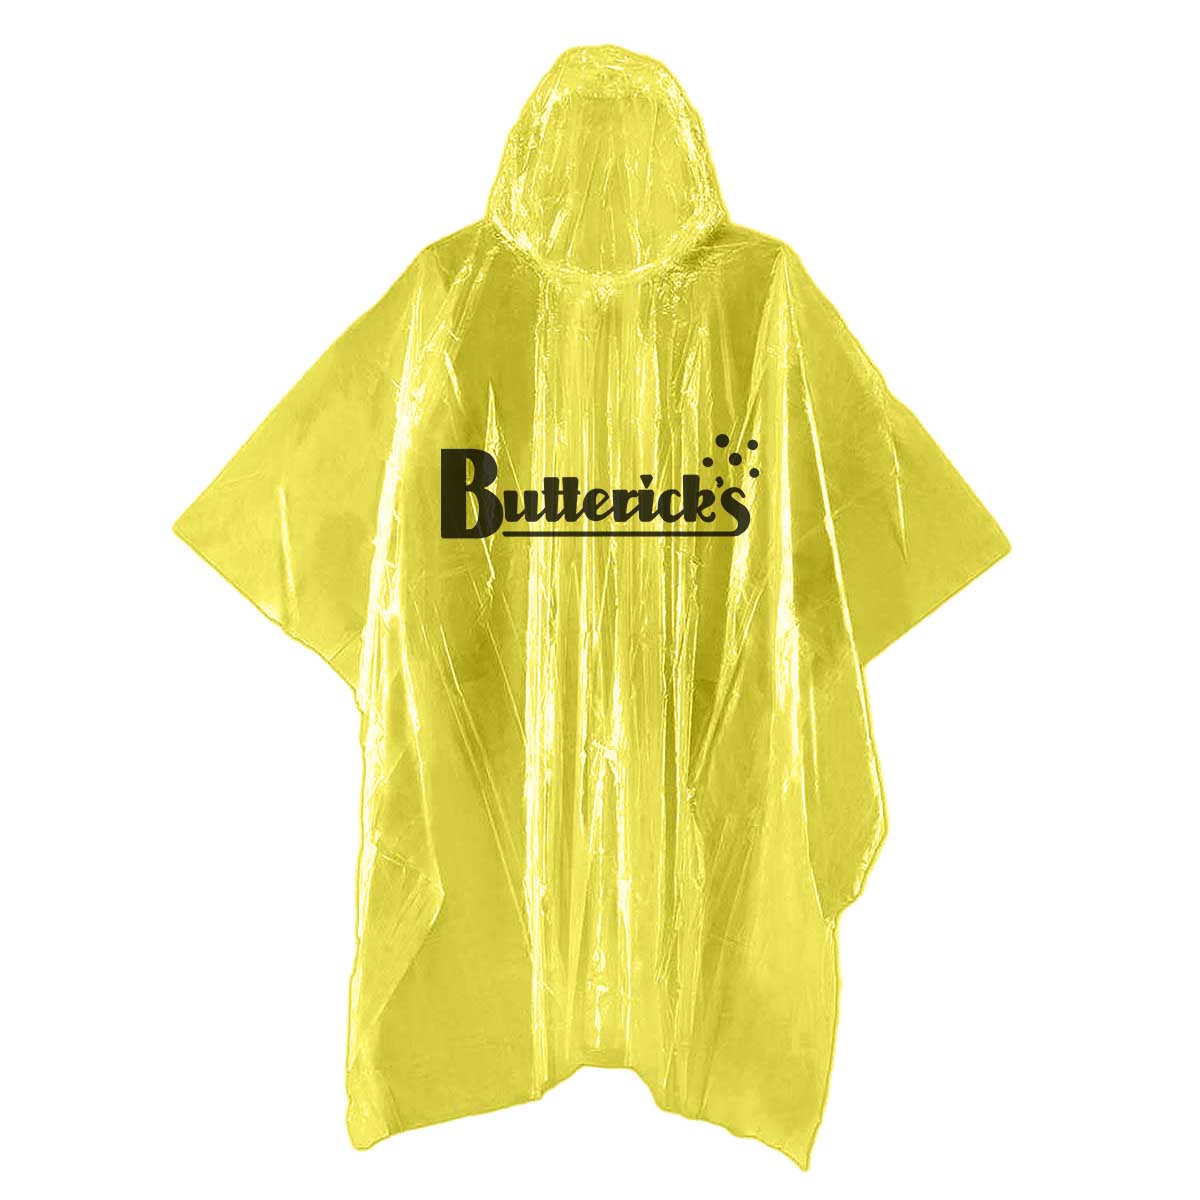 Regnponcho, Butterick’s